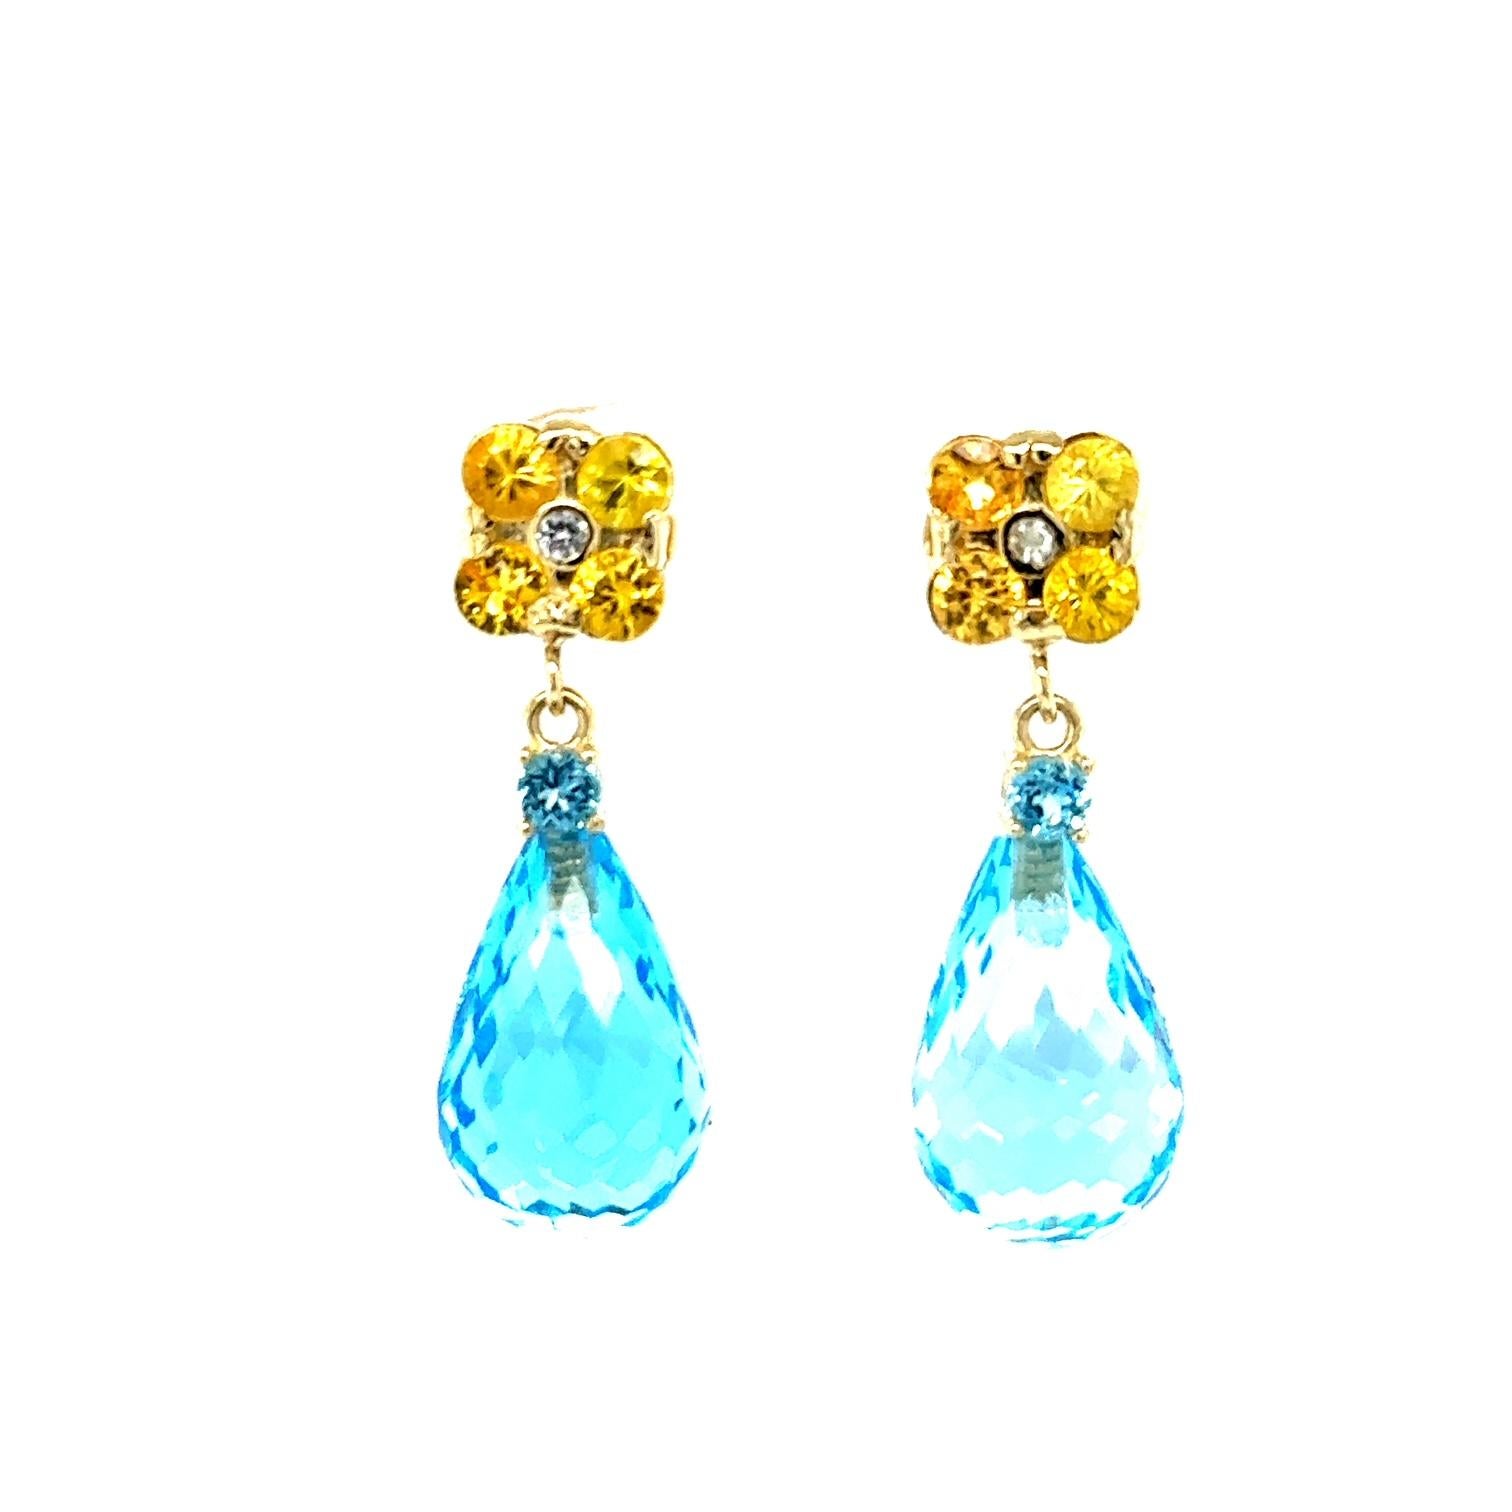 26.70 Carat Blue Topaz Yellow Sapphire Yellow Gold Drop Earrings

Item Specs:

2 Faceted Briolette Blue Topaz stones weighing approximately 24.80 carats
(Measurements of Blue Topaz Faceted Briolette 15mm x 10mm) 
8 Round Cut Yellow Sapphires